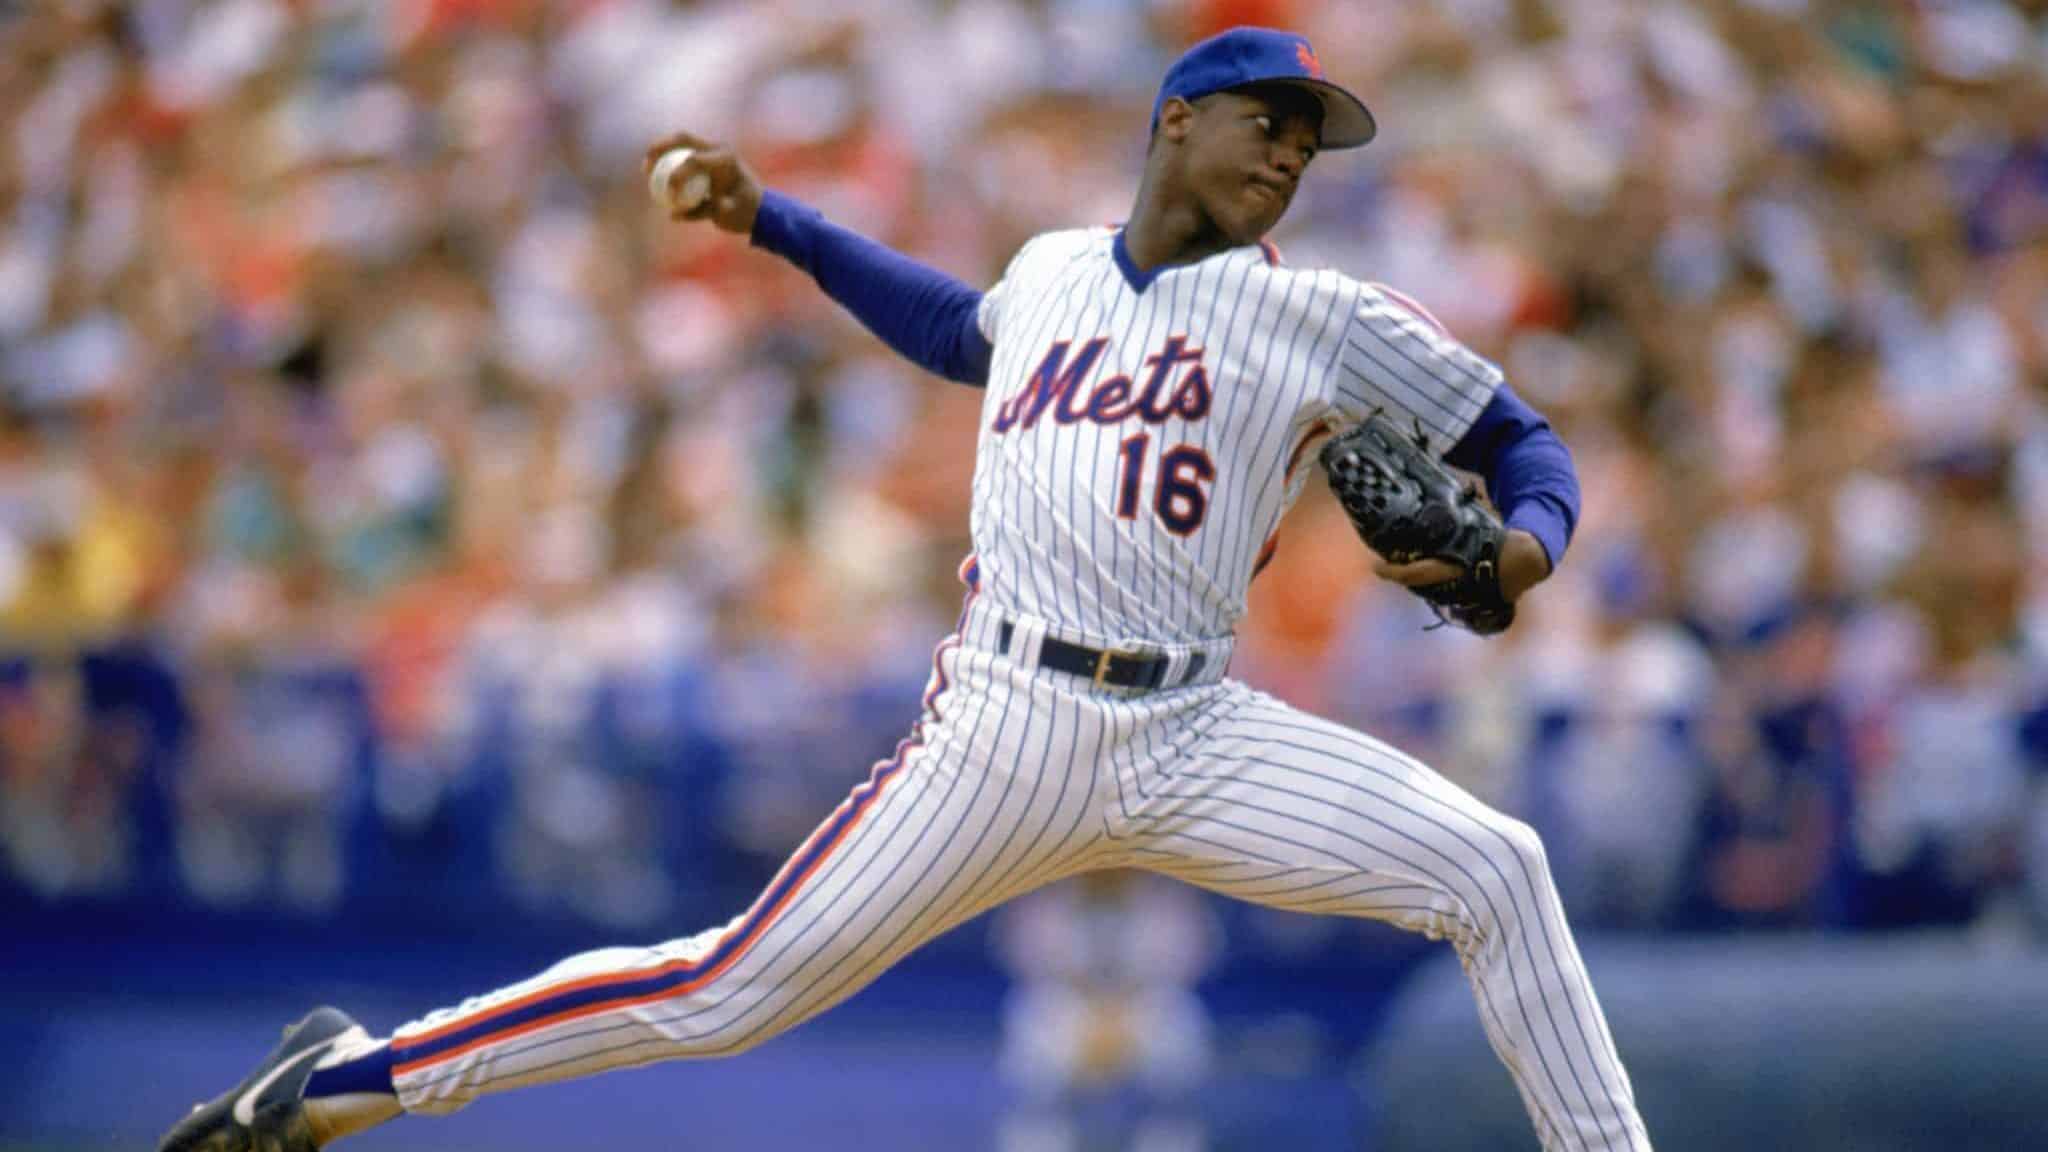 1988: Dwight Gooden of the New York Mets pitches during a game in the 1988 season.